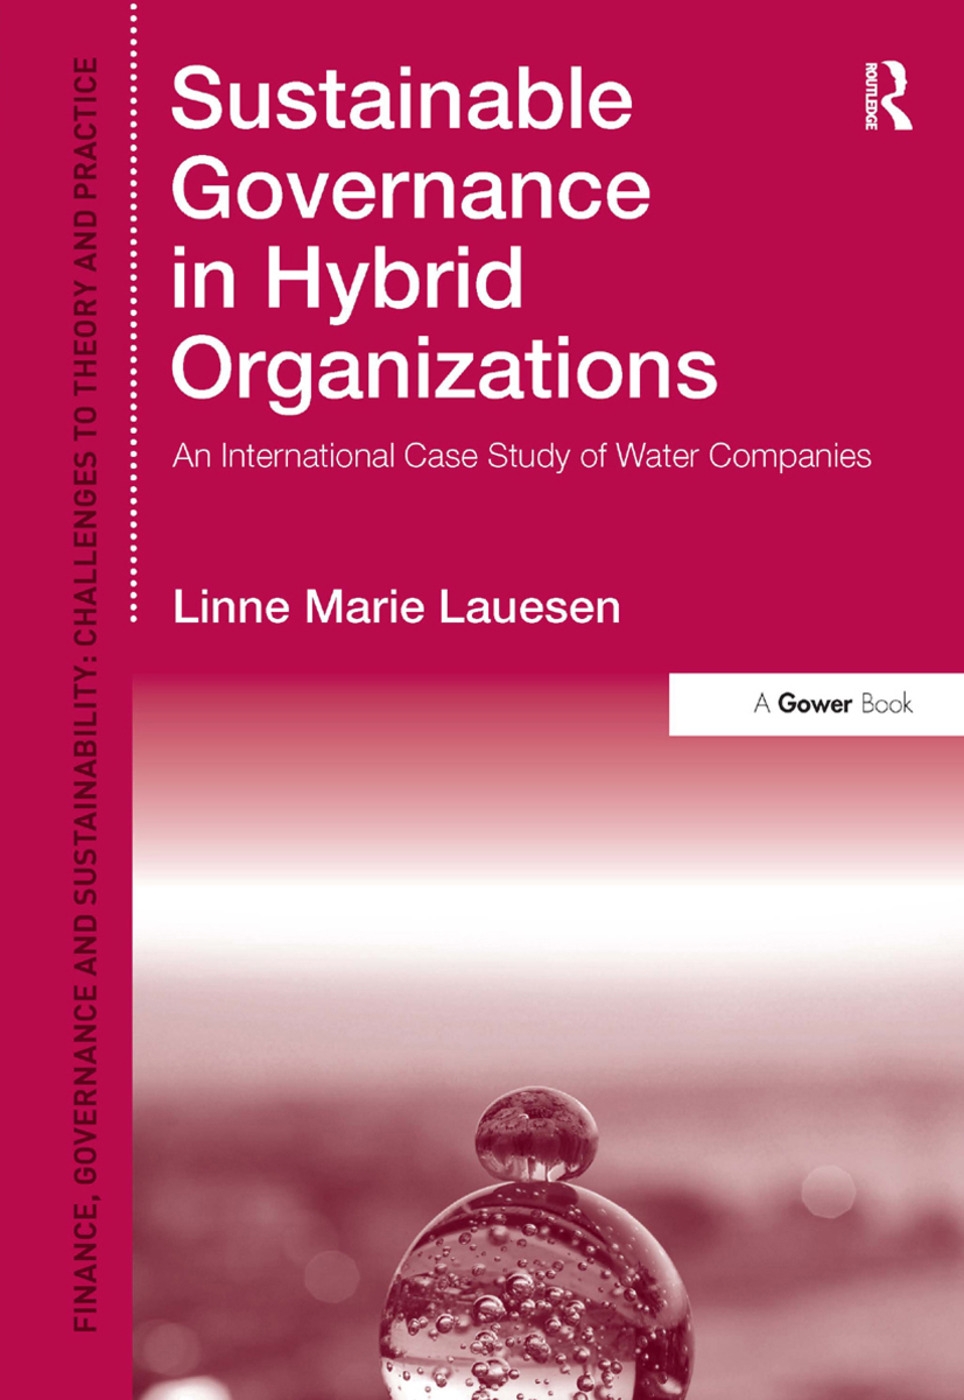 Sustainable Governance in Hybrid Organizations: An International Case Study of Water Companies